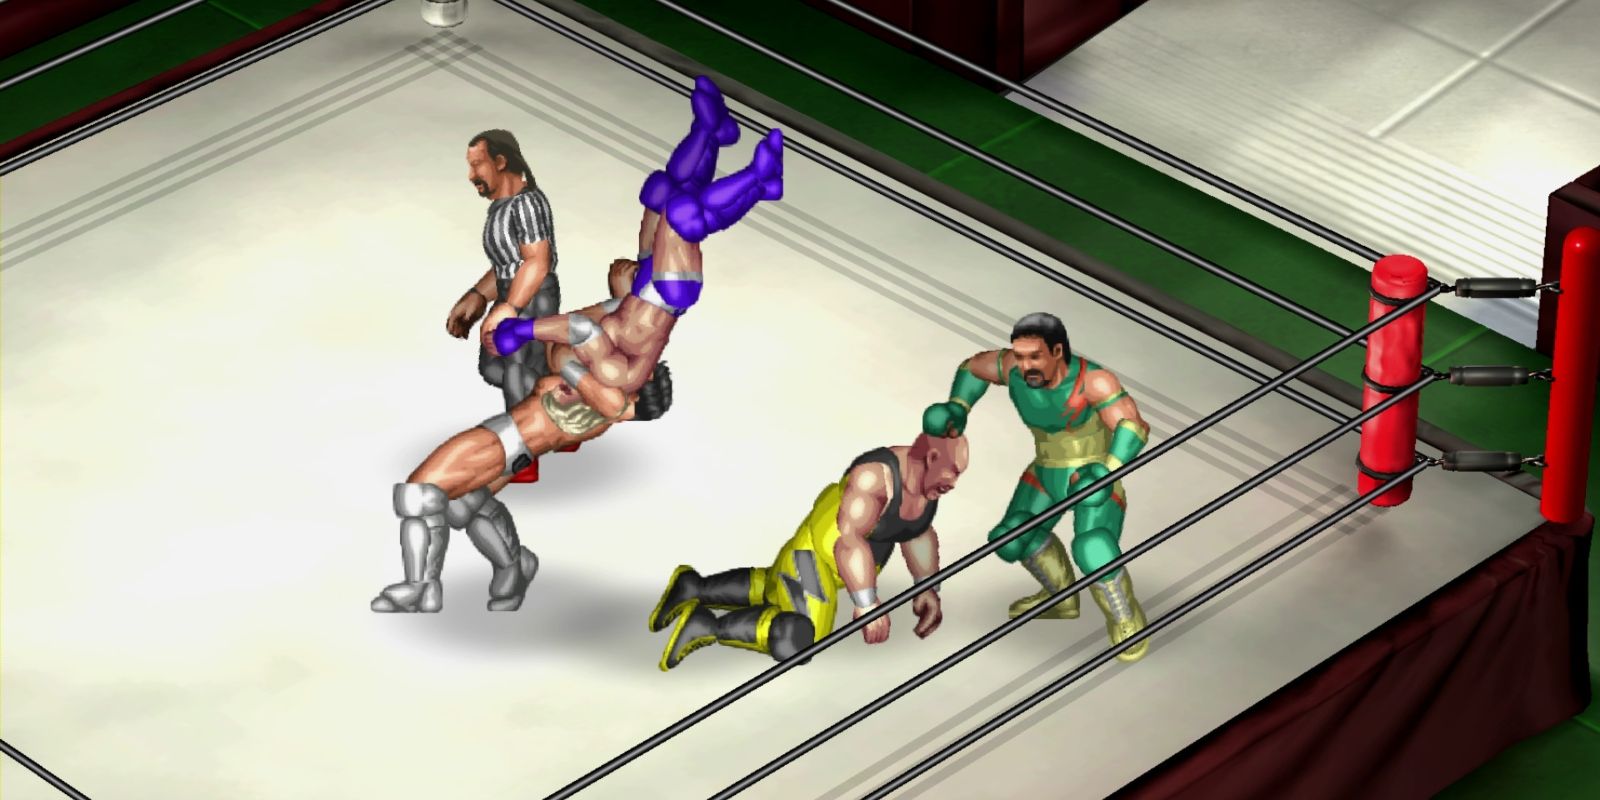 A screenshot from Fire Pro Wrestling World featuring 2 pairs of wrestlers and a referee